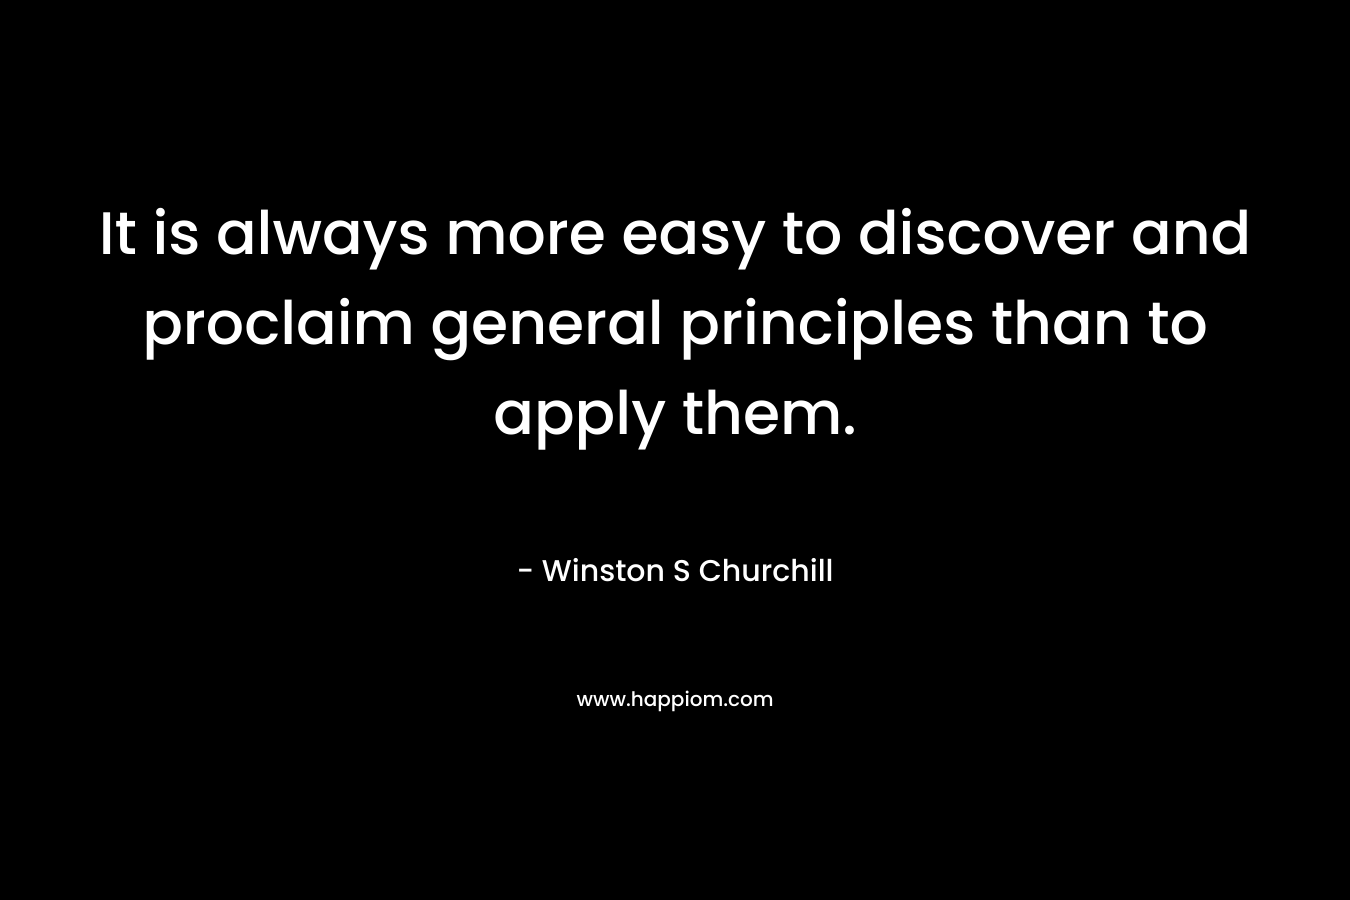 It is always more easy to discover and proclaim general principles than to apply them. – Winston S Churchill